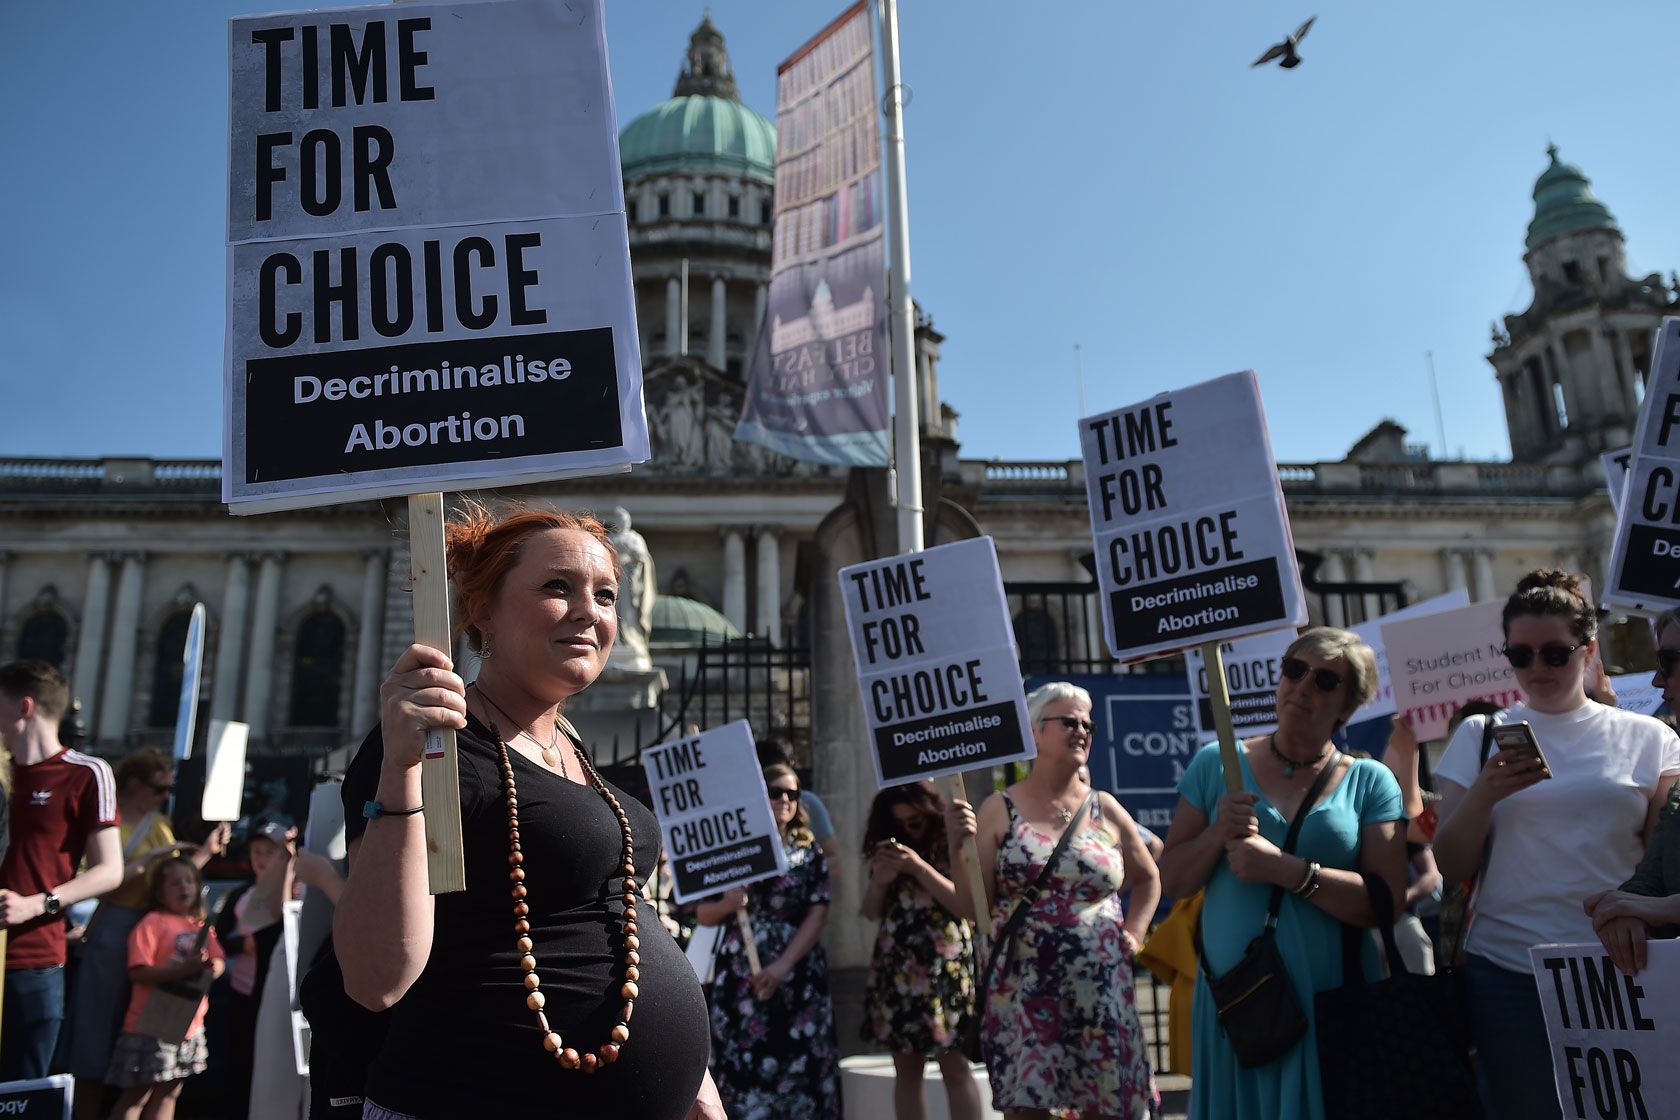 A pregnant woman and others protest against an anti-abortion referendum outside Belfast City Hall, holding signs that say 